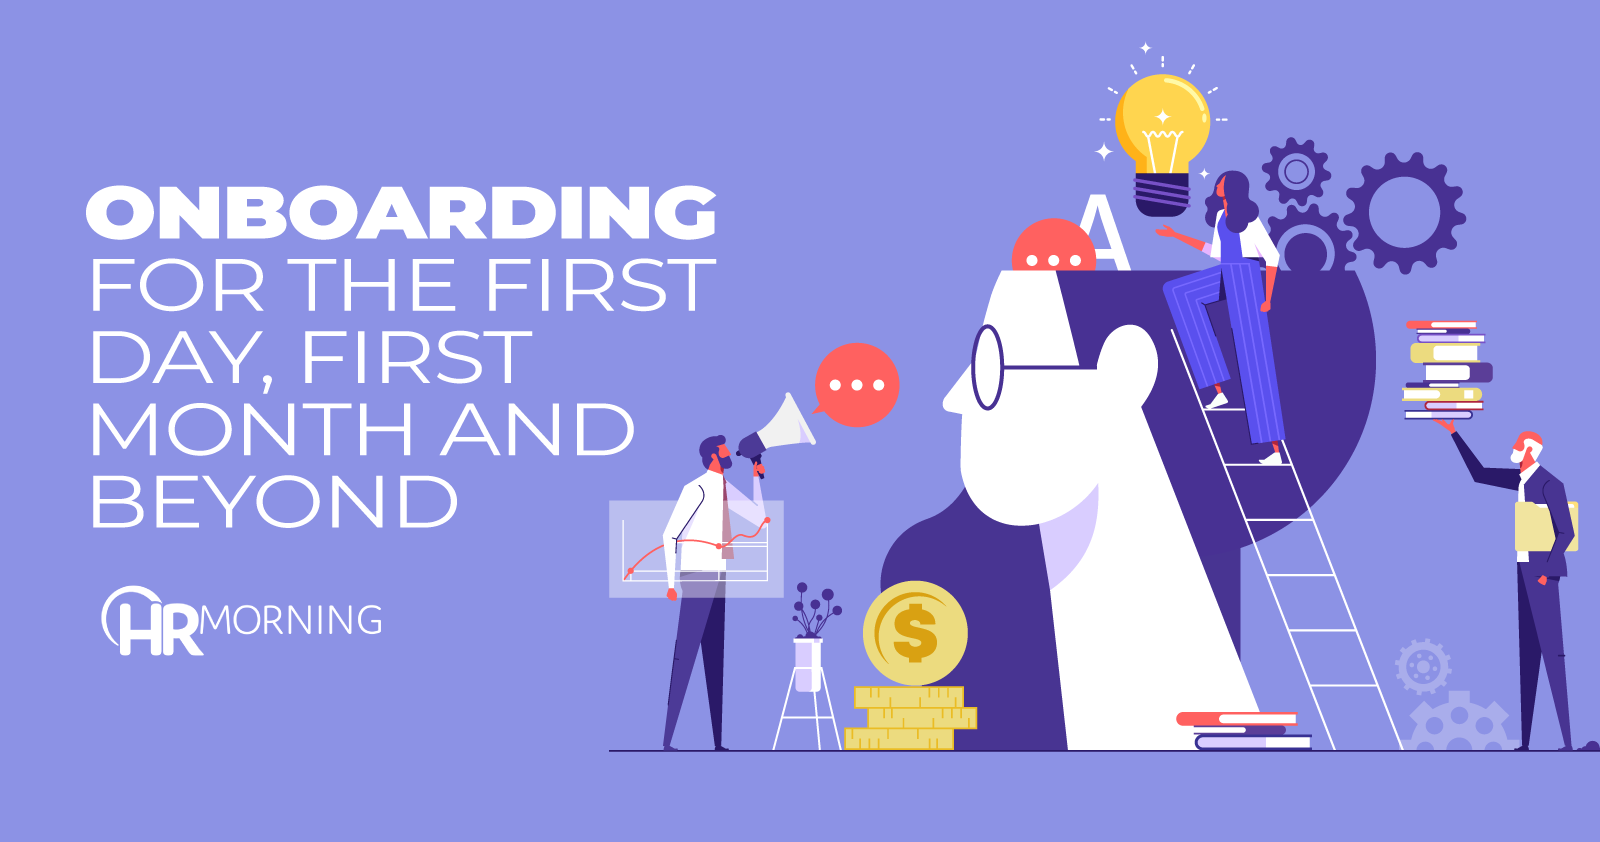 Onboarding for the first day, first month and beyond